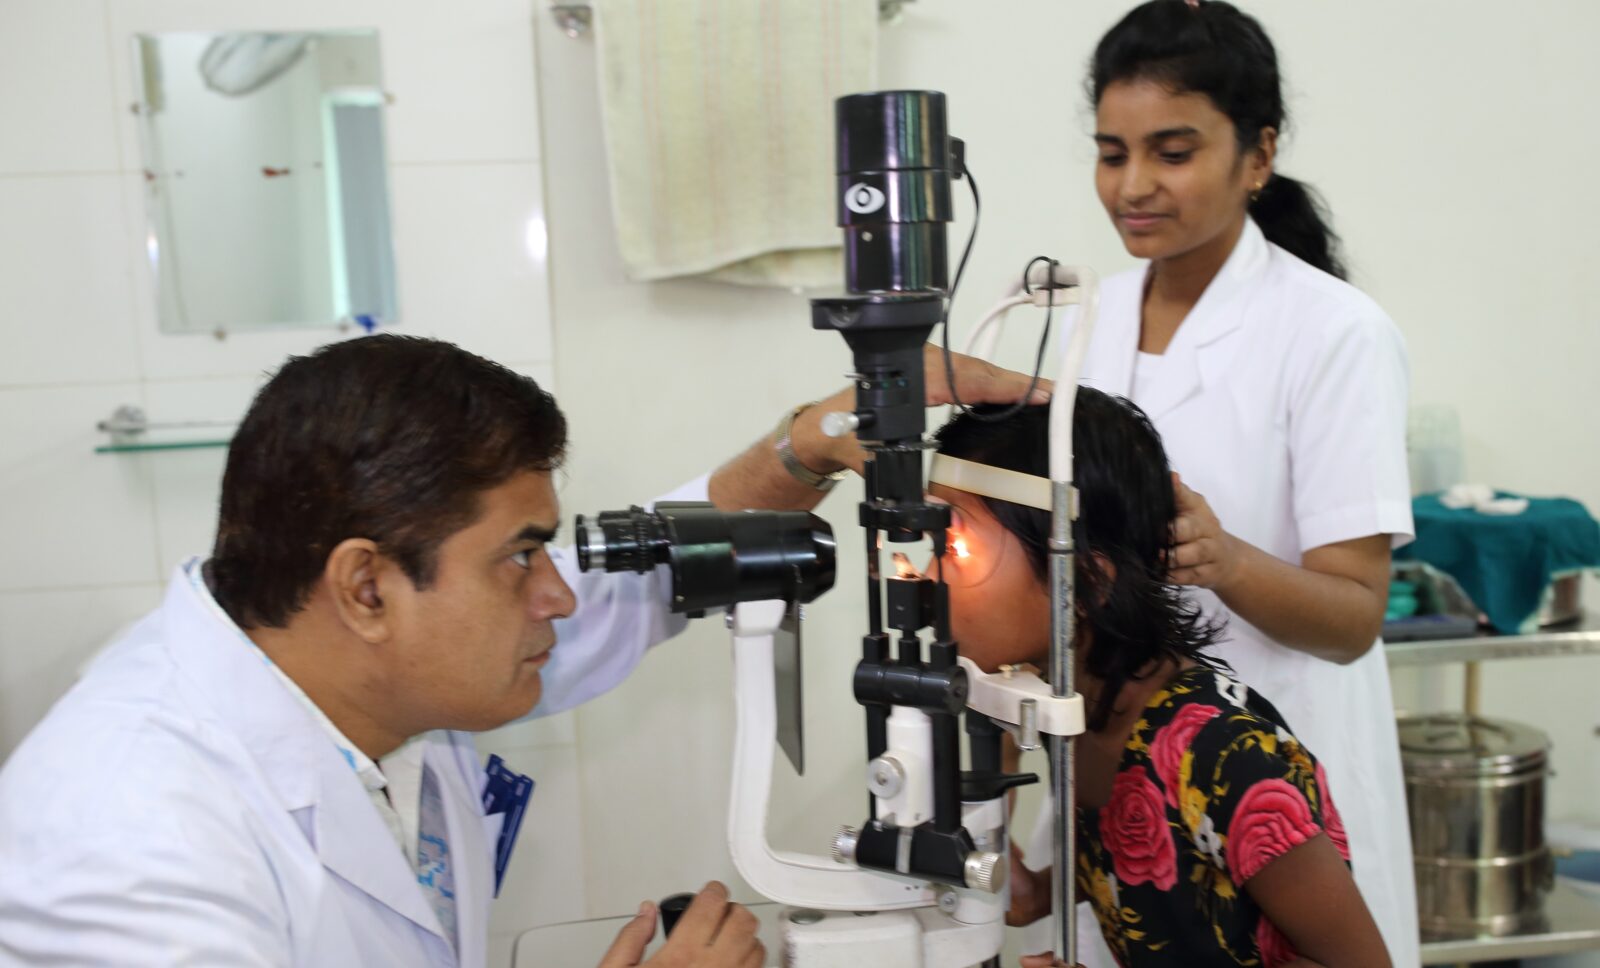 a doctor uses a piece of medical equipment to check a young female patient's eyes